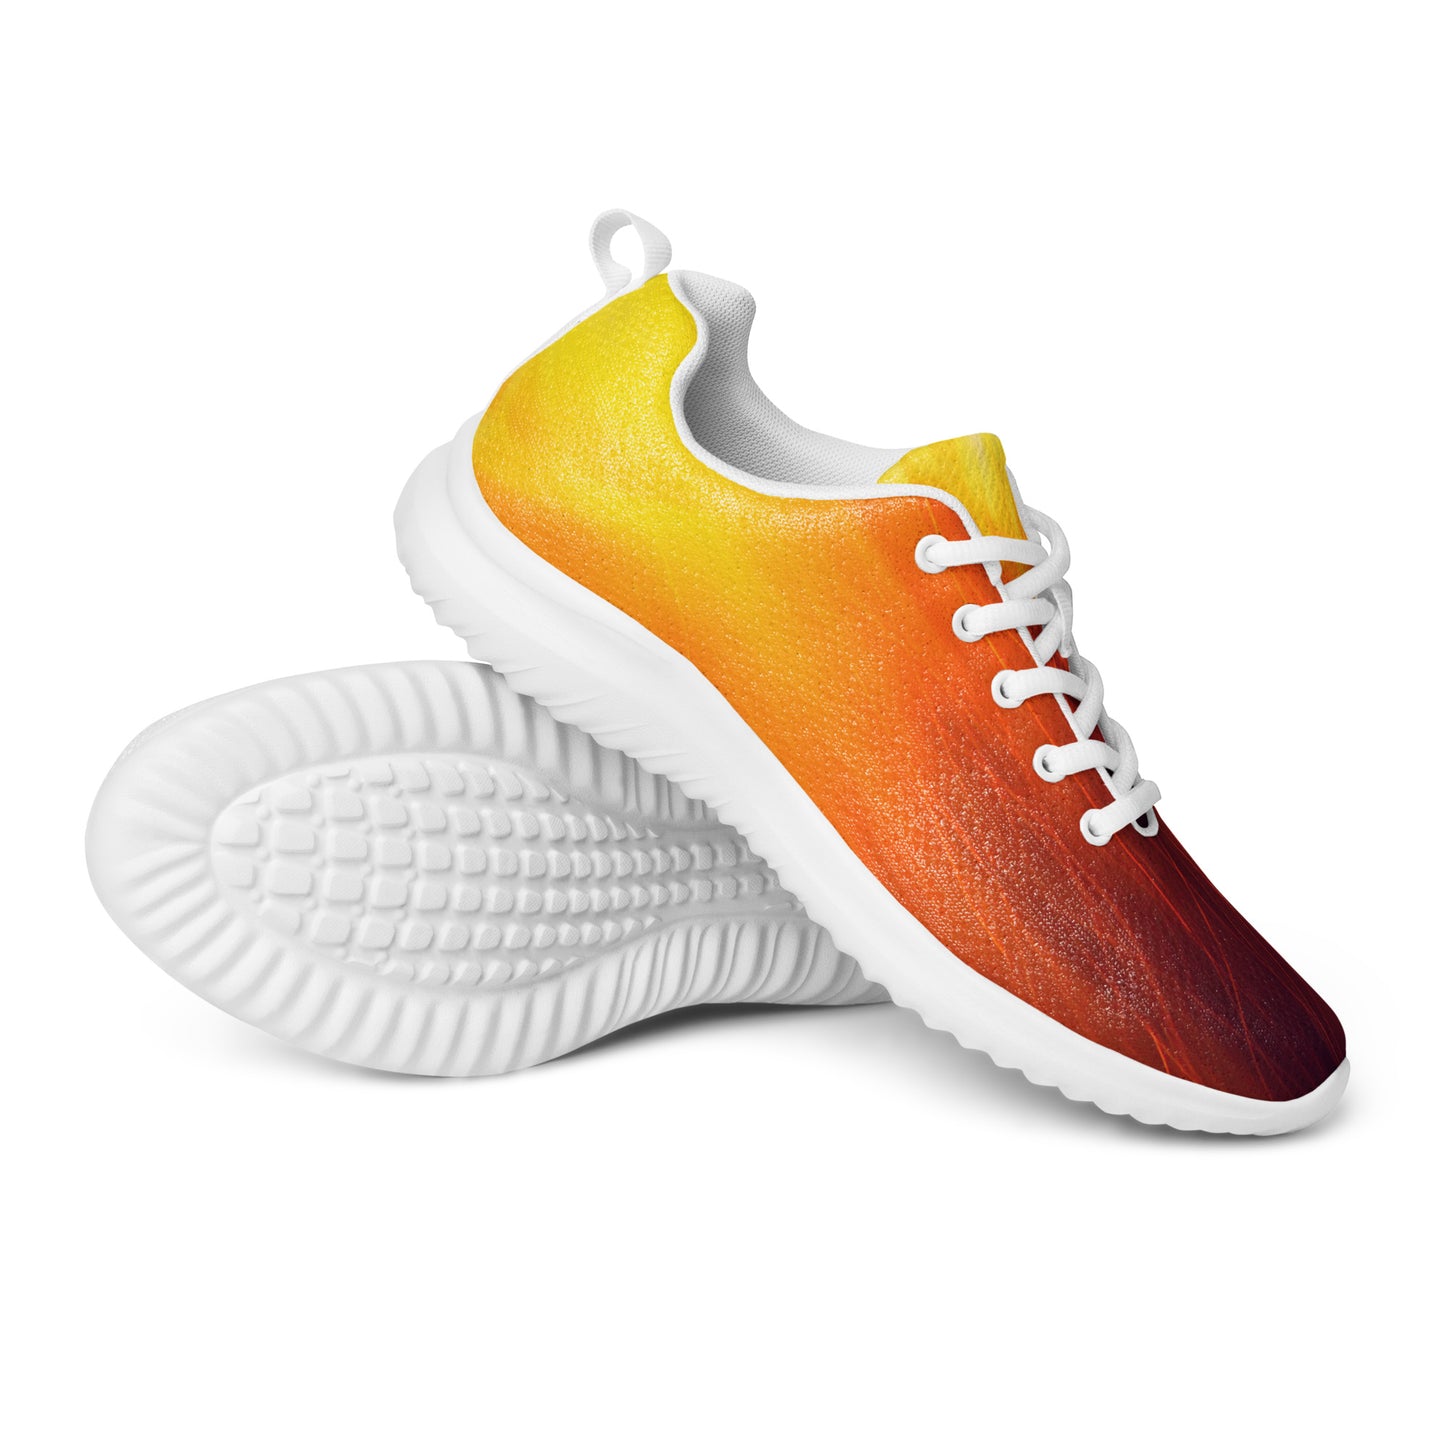 Artist on Fire Women's Athletic Shoes